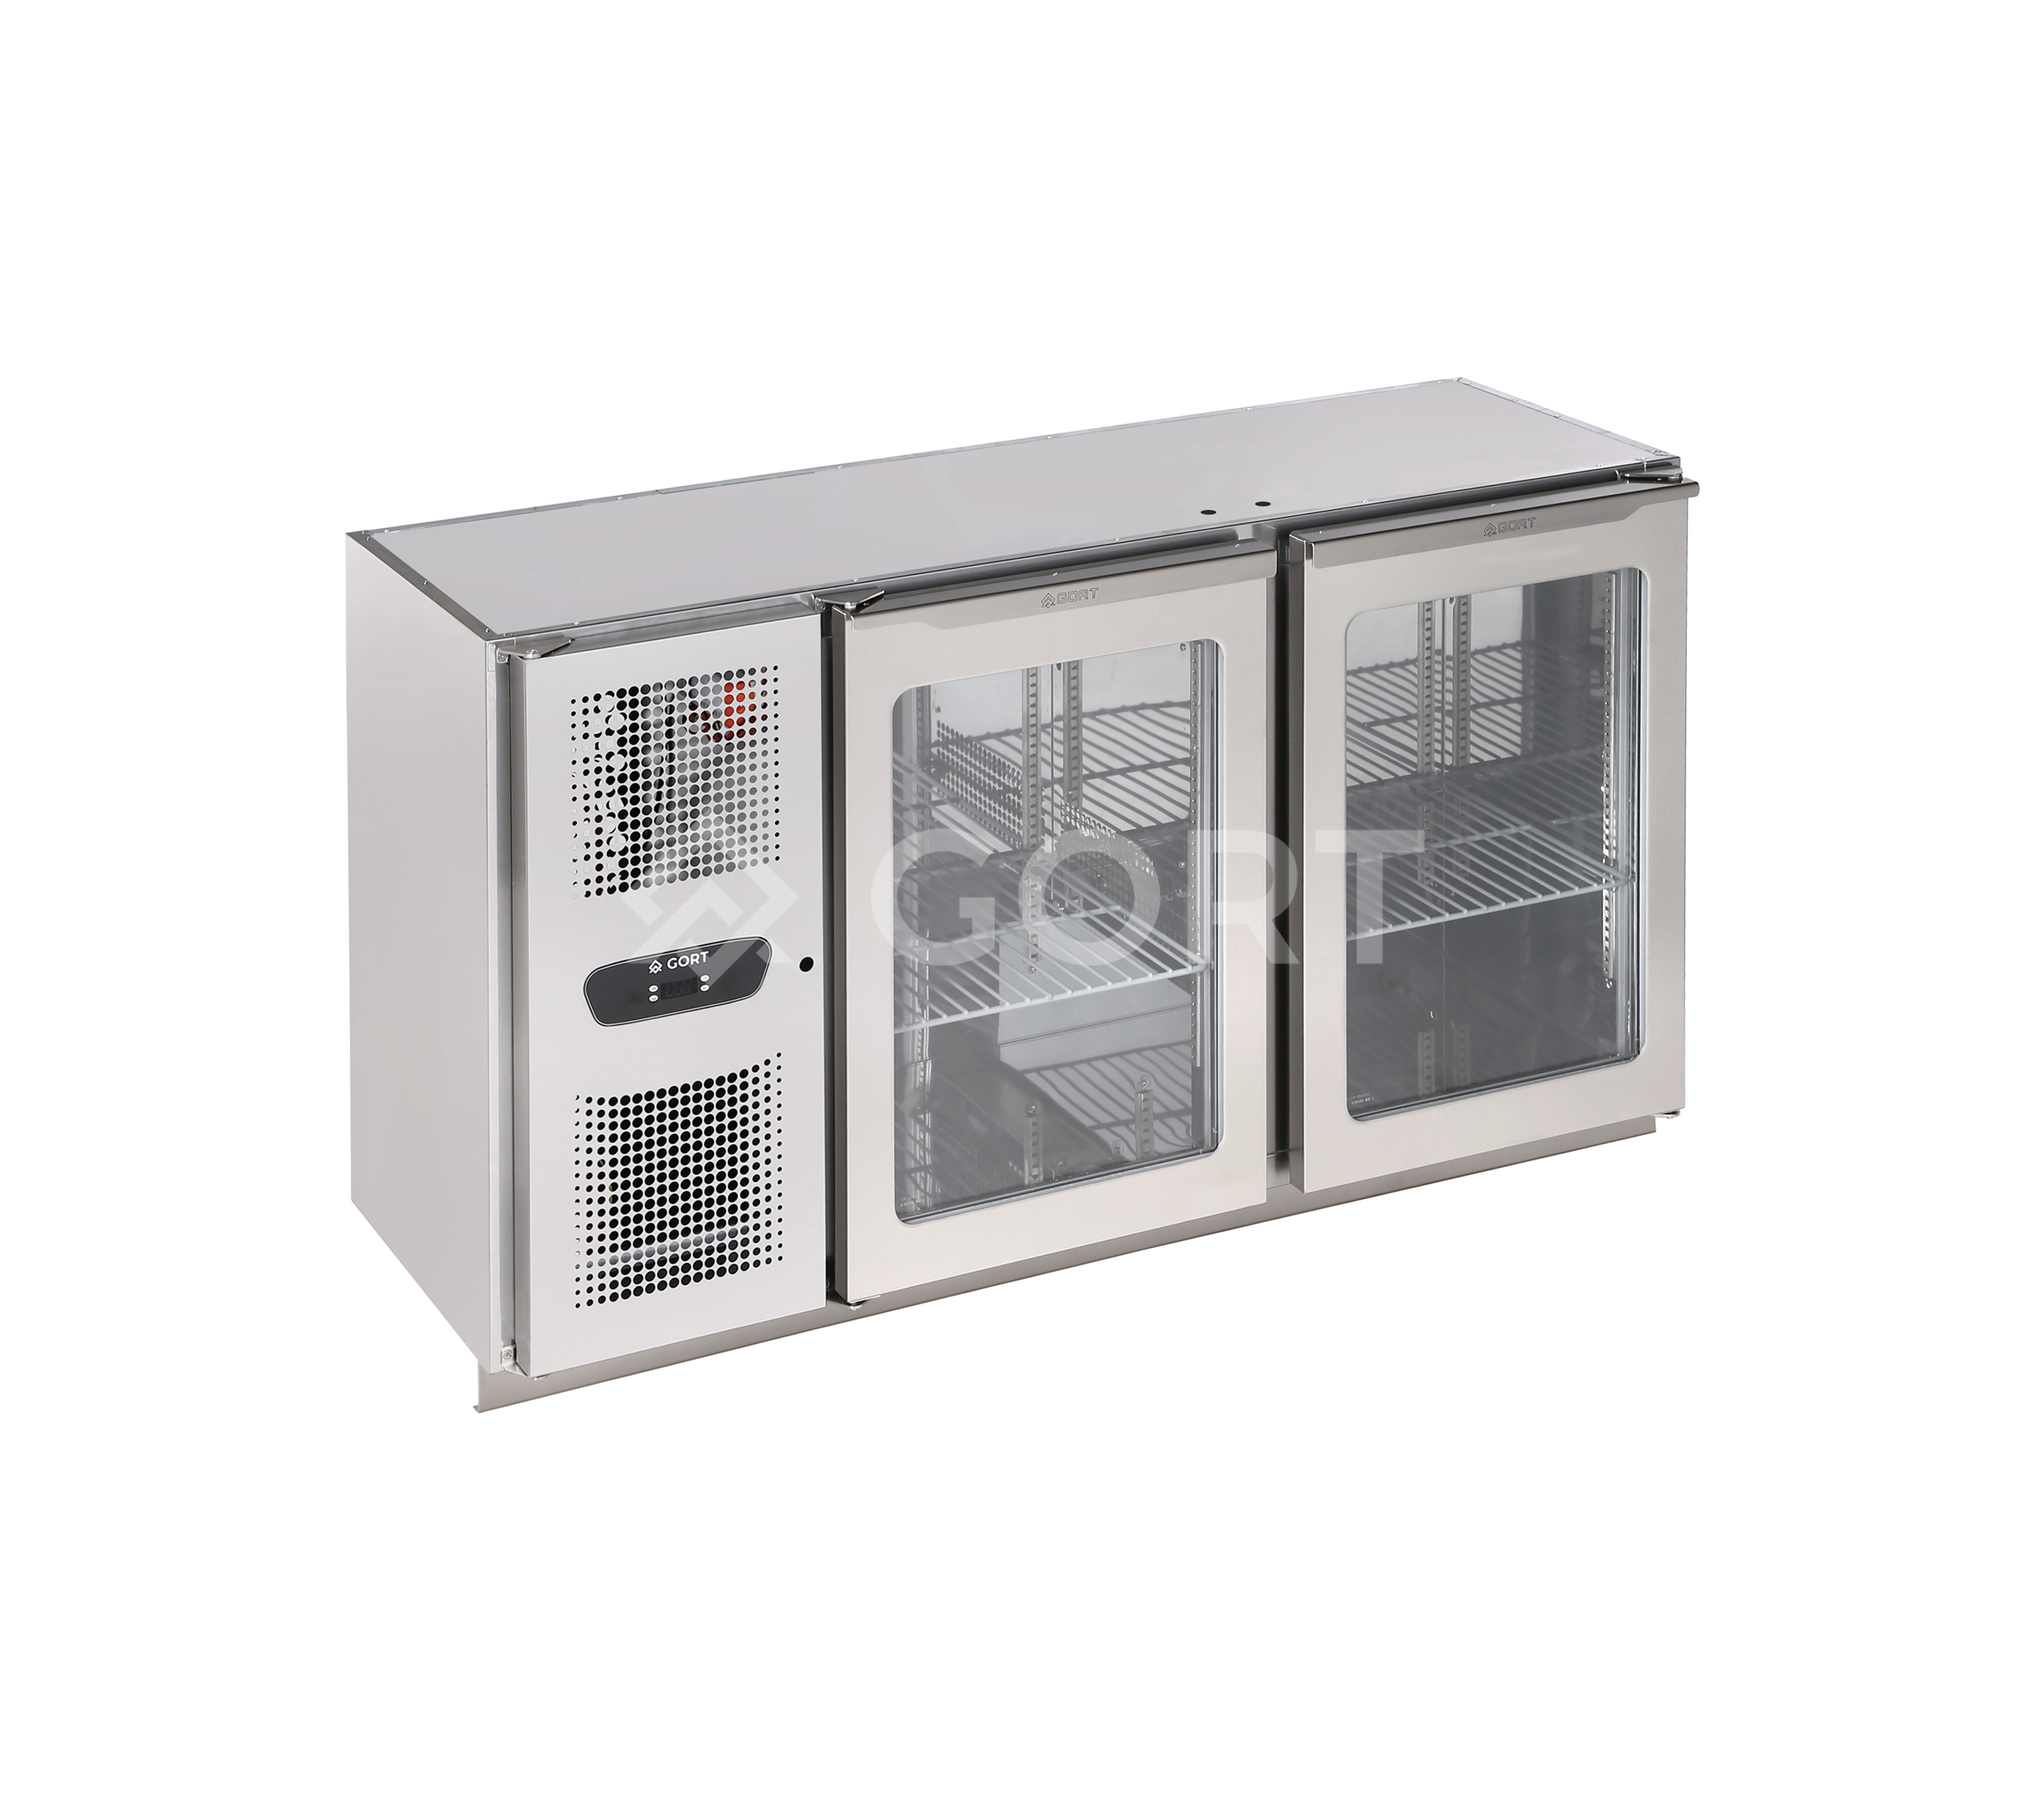 BAR COUNTER REFRIGERATOR with 2 glass doors – compressor on the side